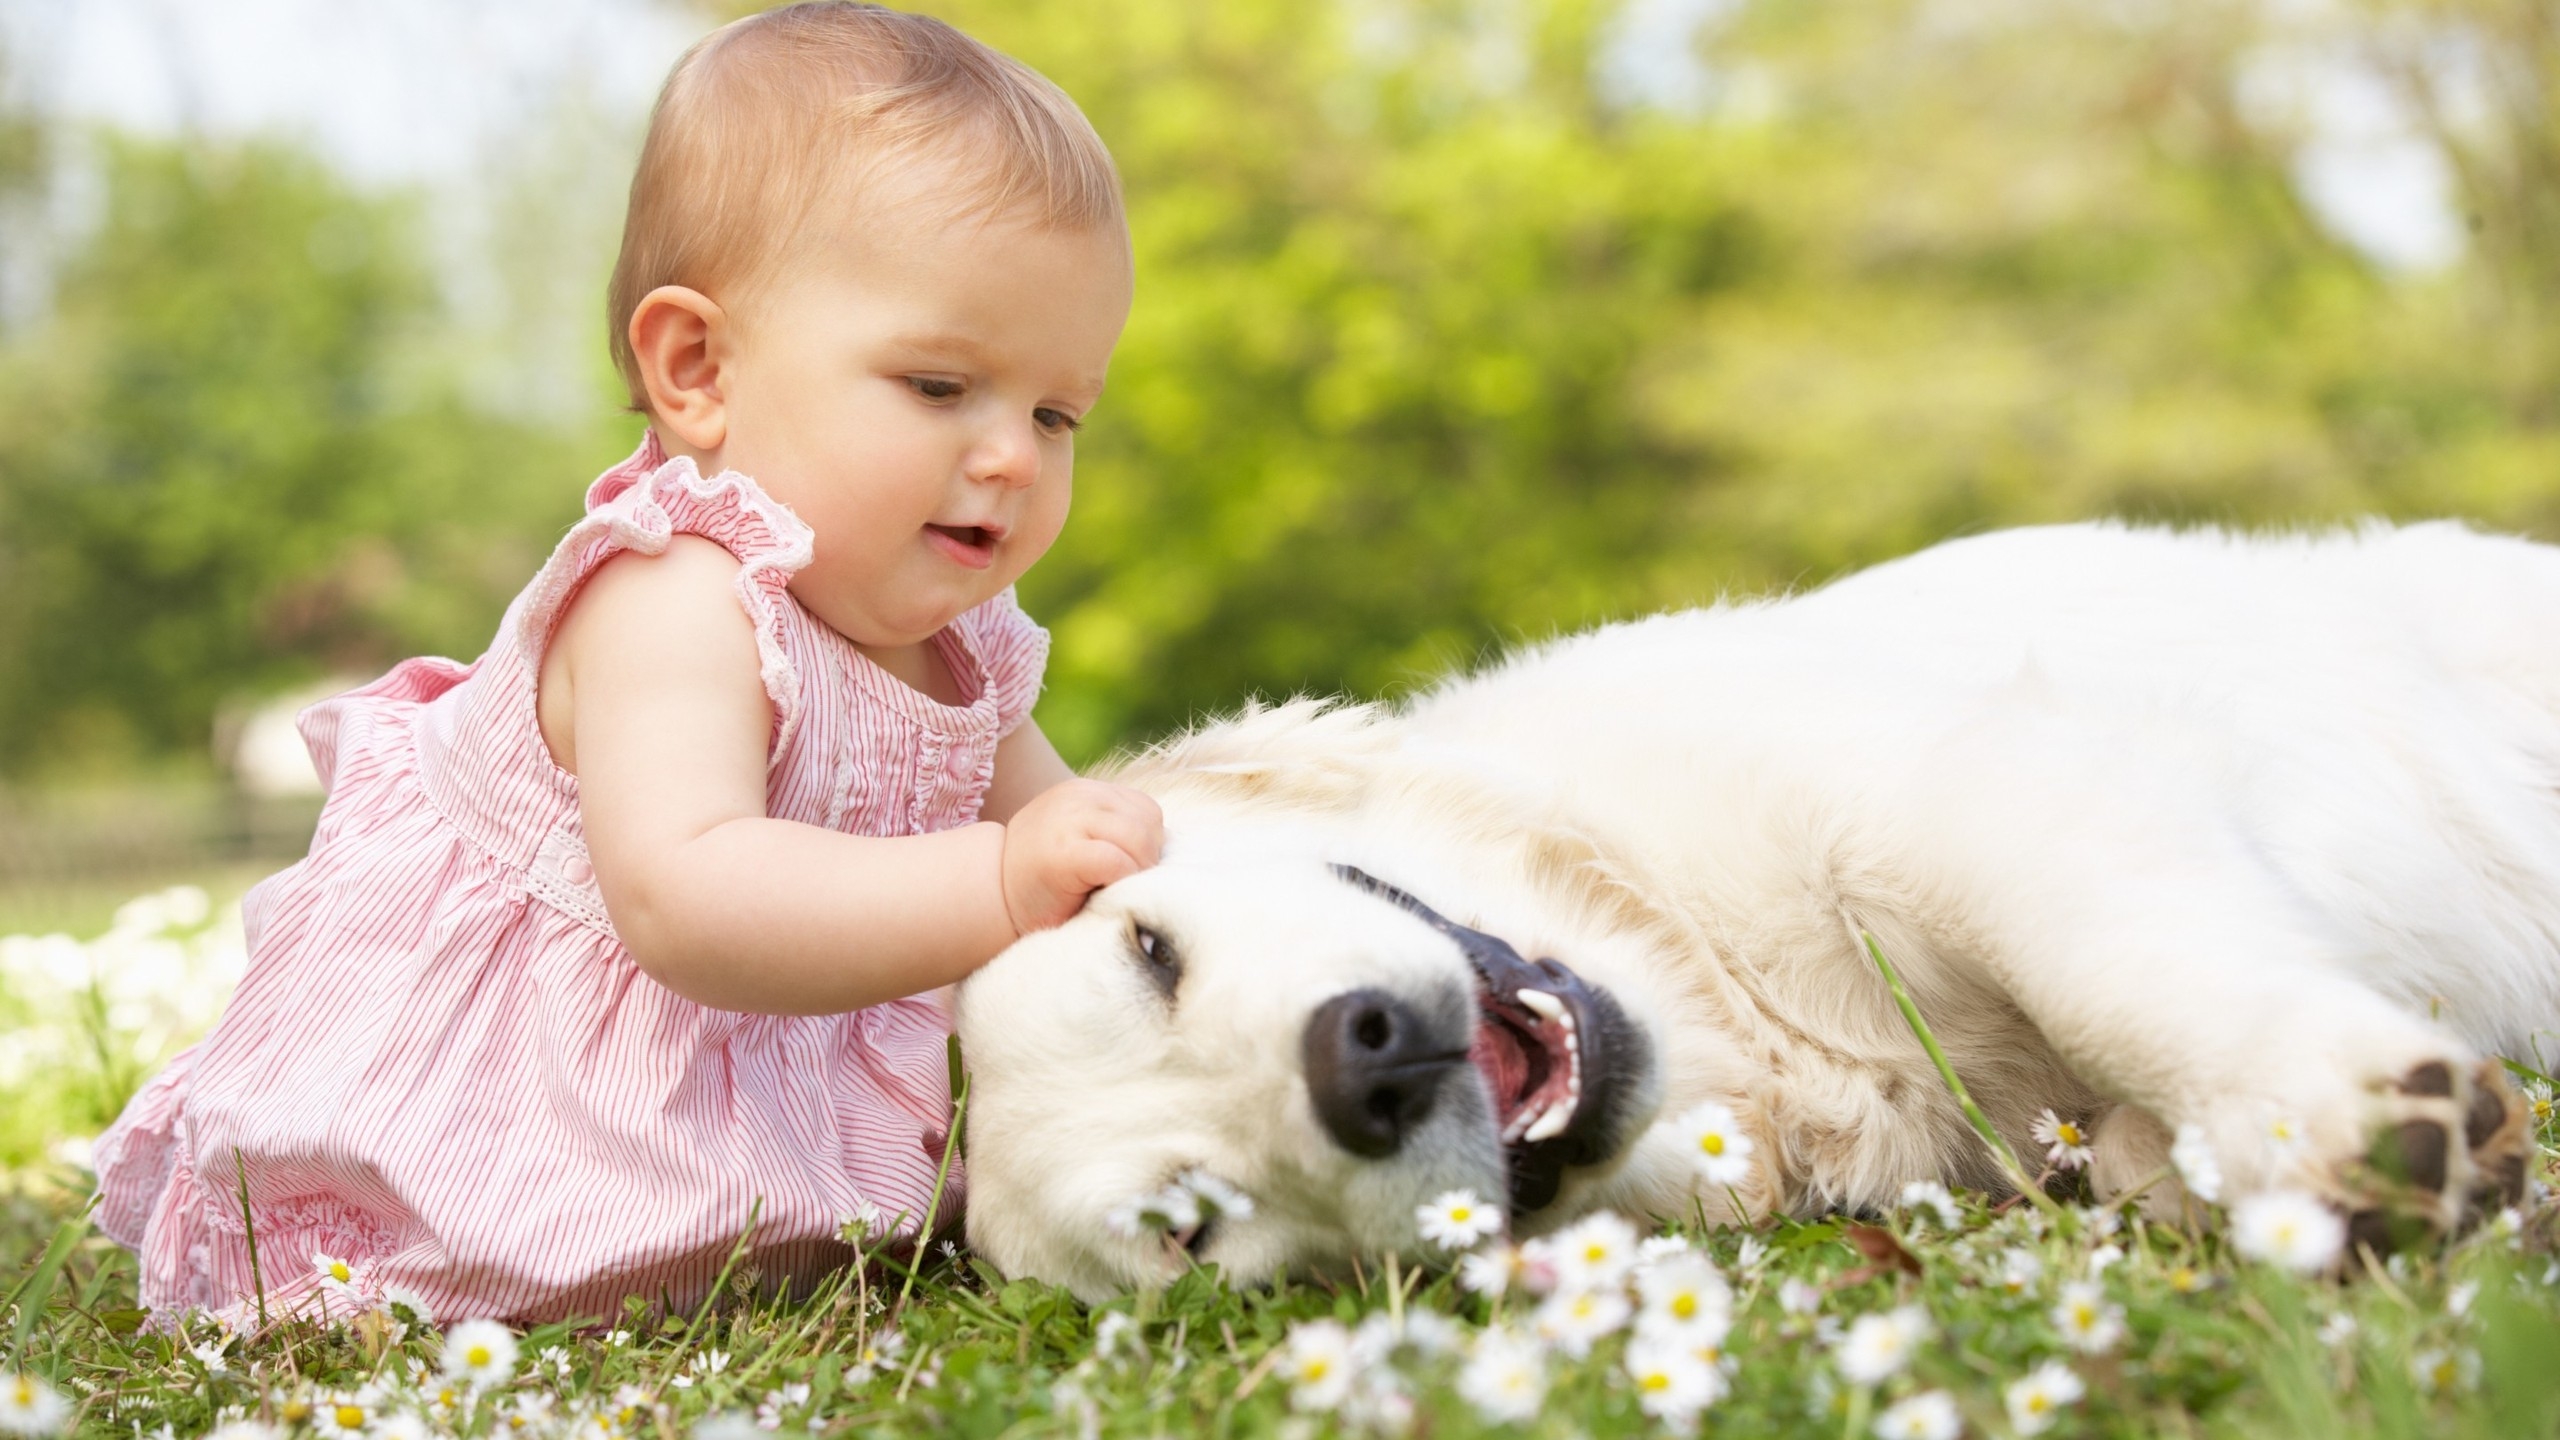 Girl With White Dog - HD Wallpaper 